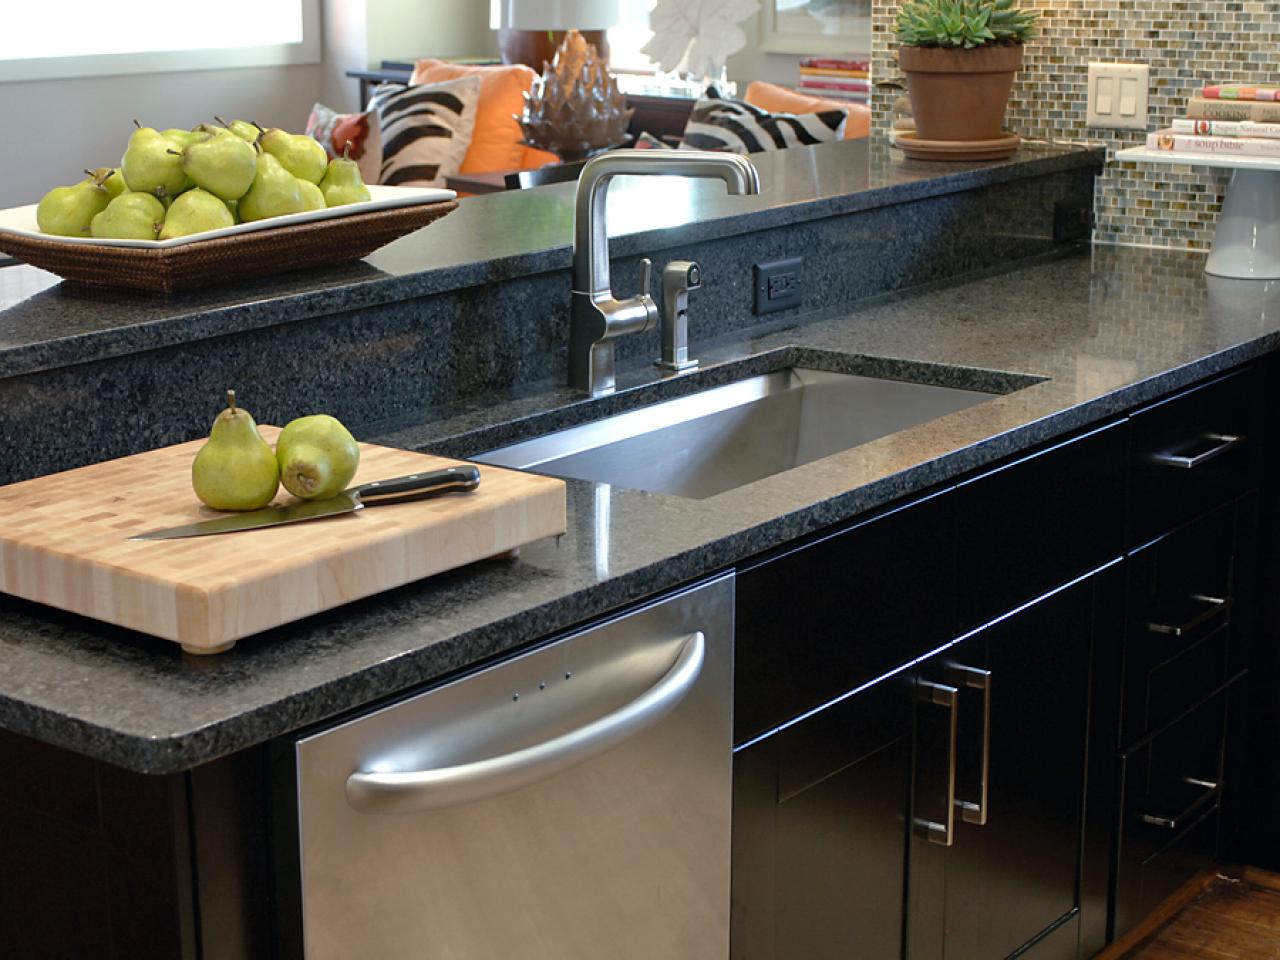 Choosing The Right Kitchen Sink And Faucet Hgtv for Best Kitchen Sinks And Faucets